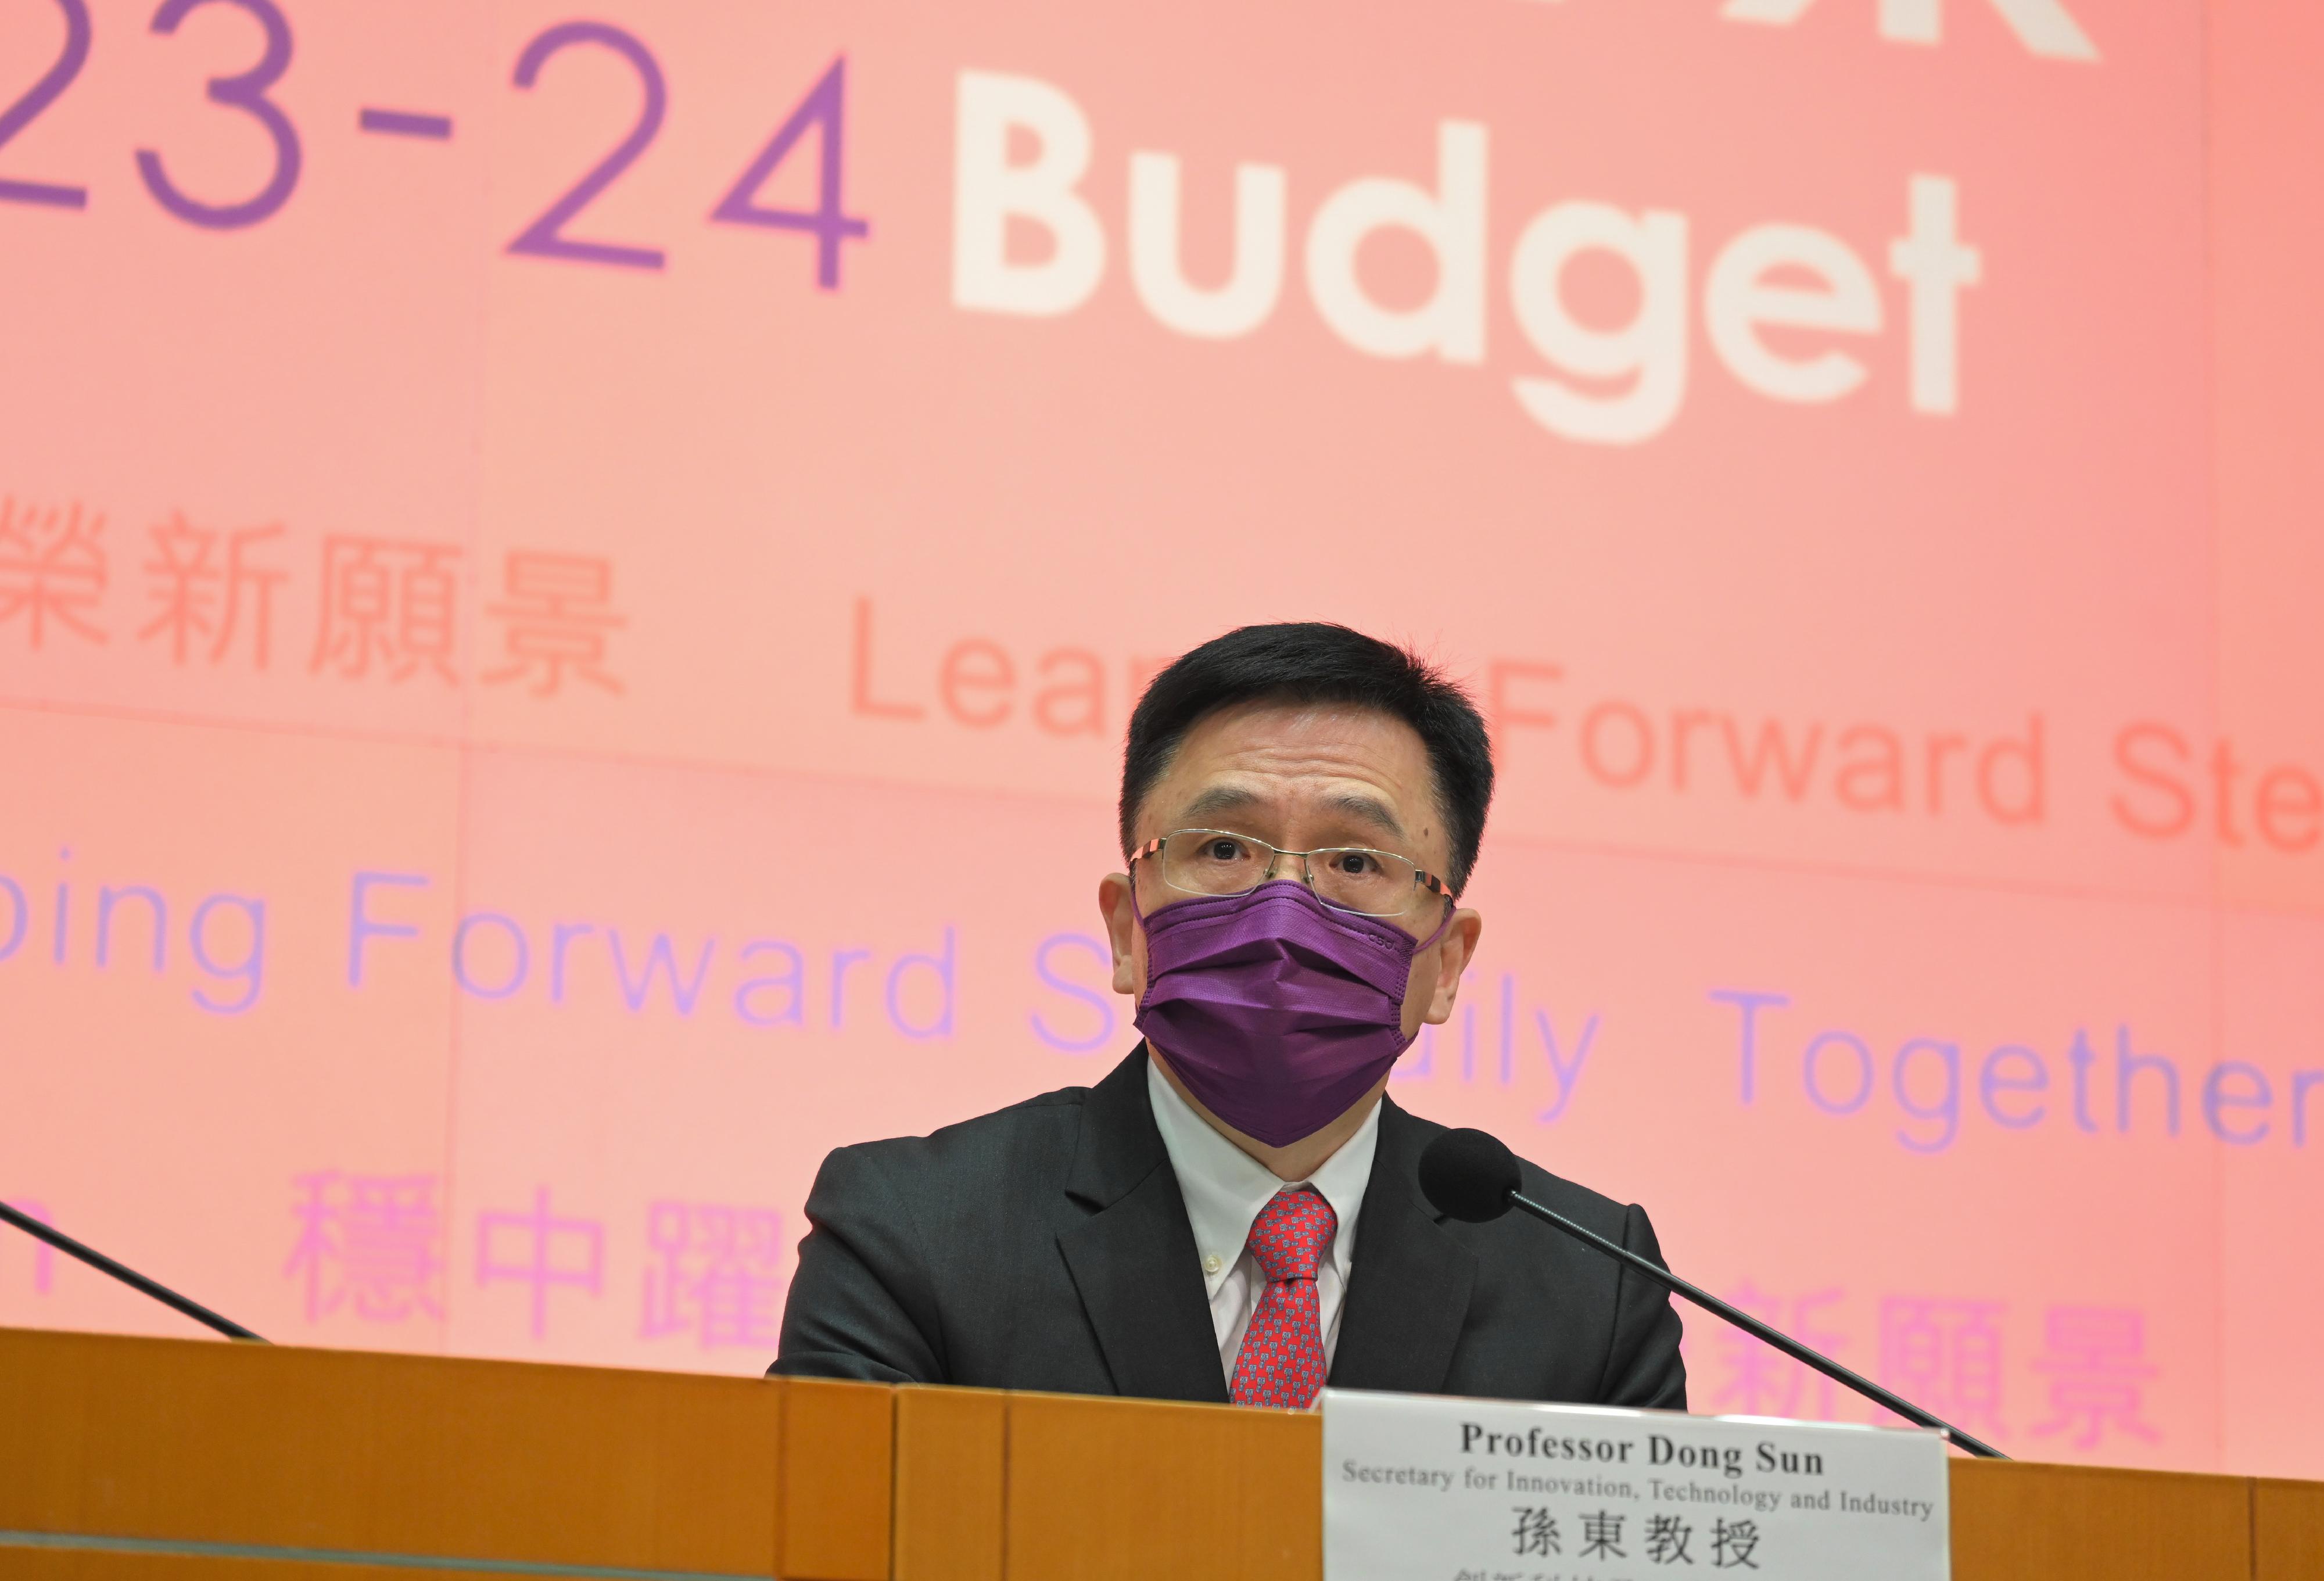 The Secretary for Innovation, Technology and Industry, Professor Sun Dong, held a press conference today (February 24) to elaborate on the initiatives related to the Innovation Technology and Industry Bureau in the 2023-24 Budget.